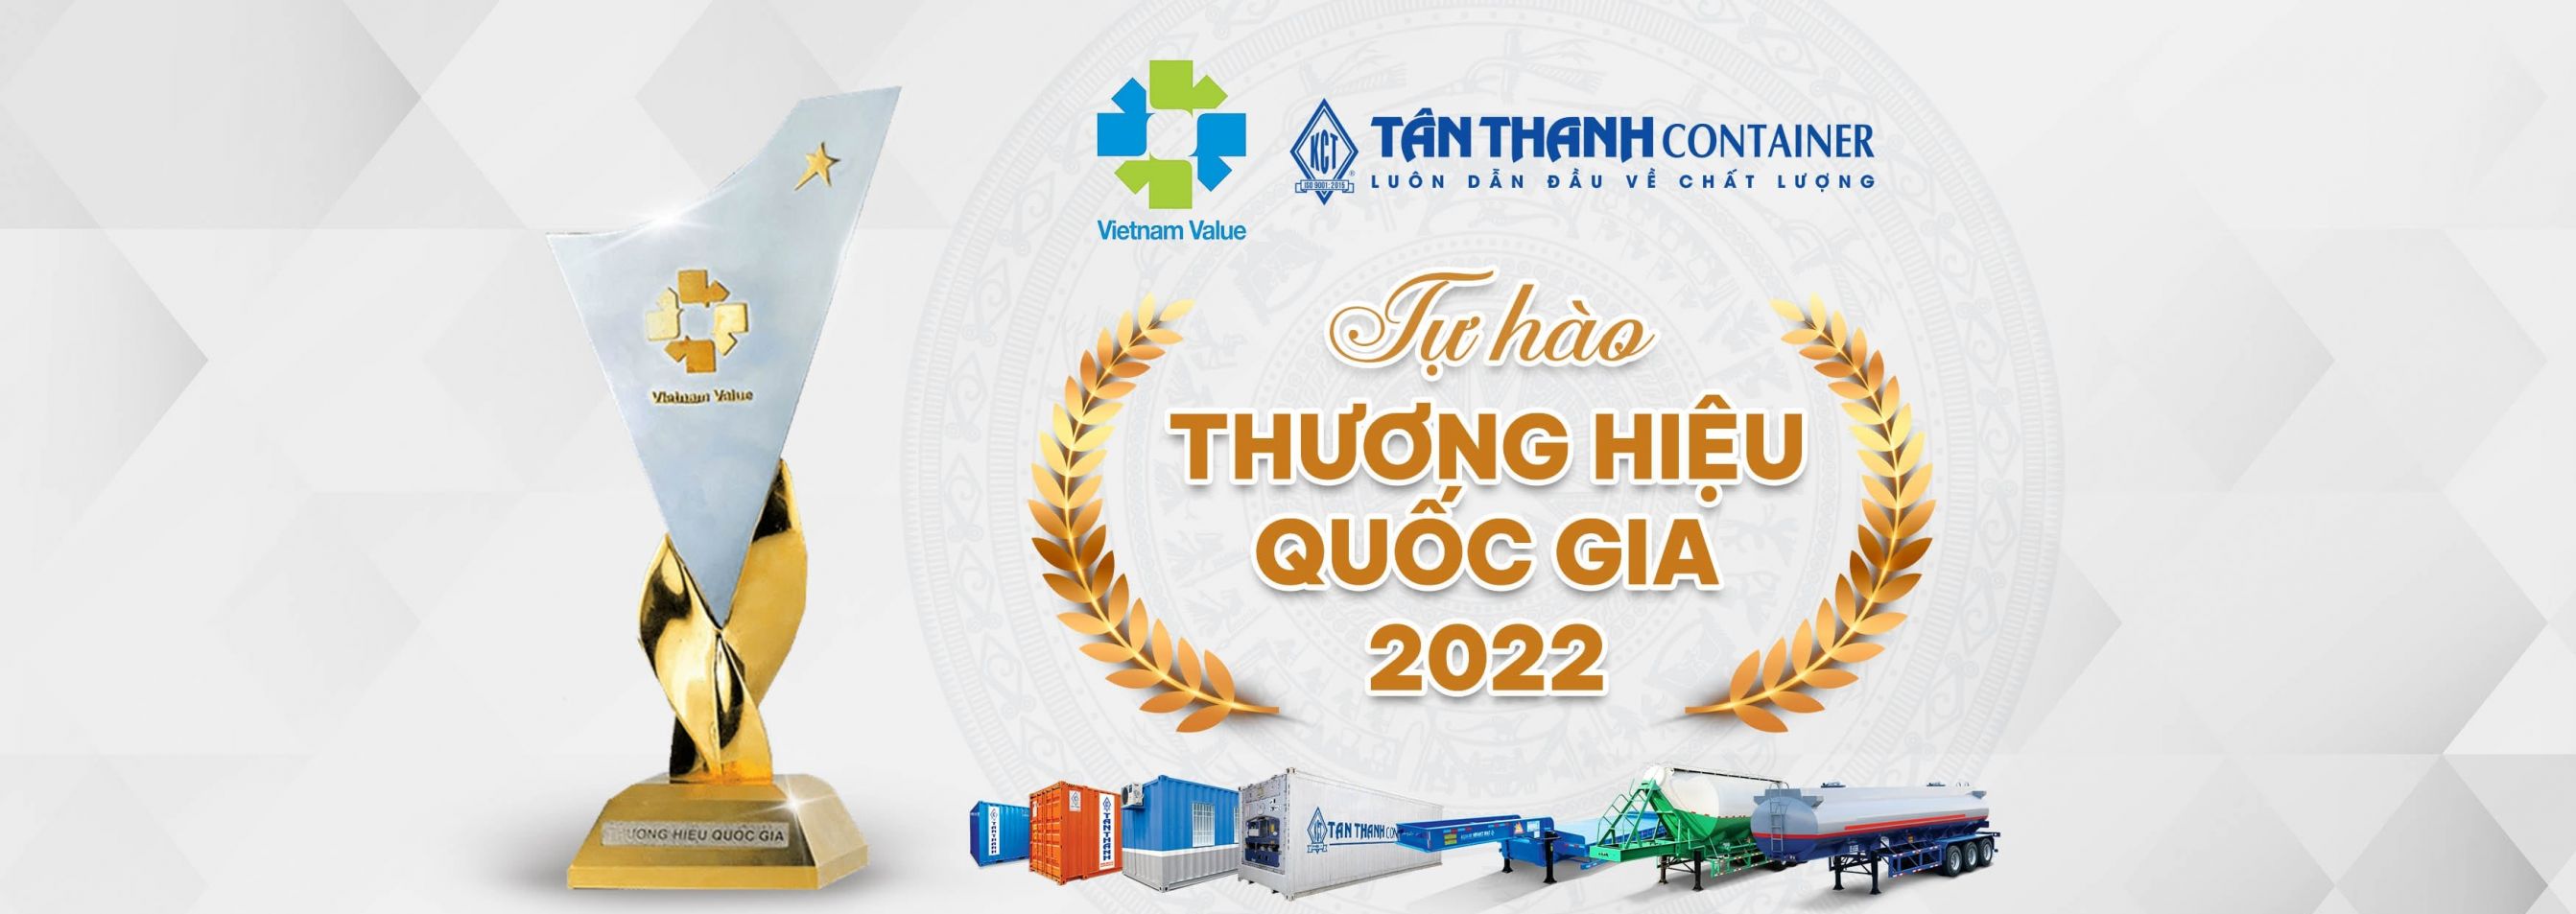 Tân Thanh Container